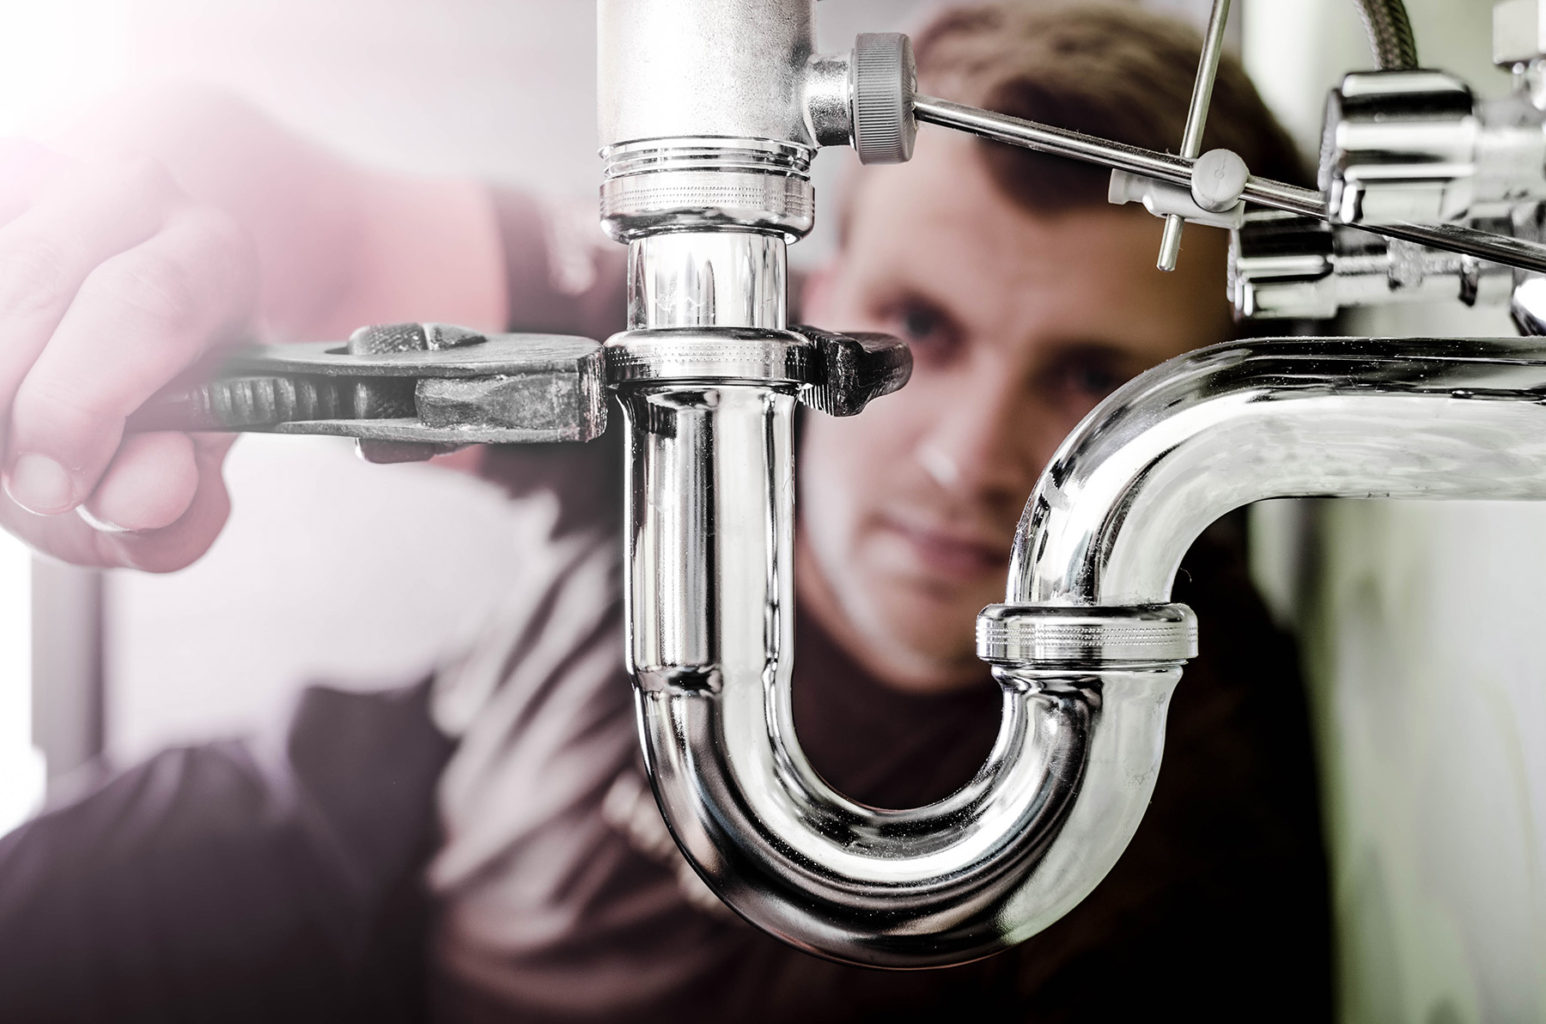 Plumbers in Canberra - Call 24/7 on 0427 625 716